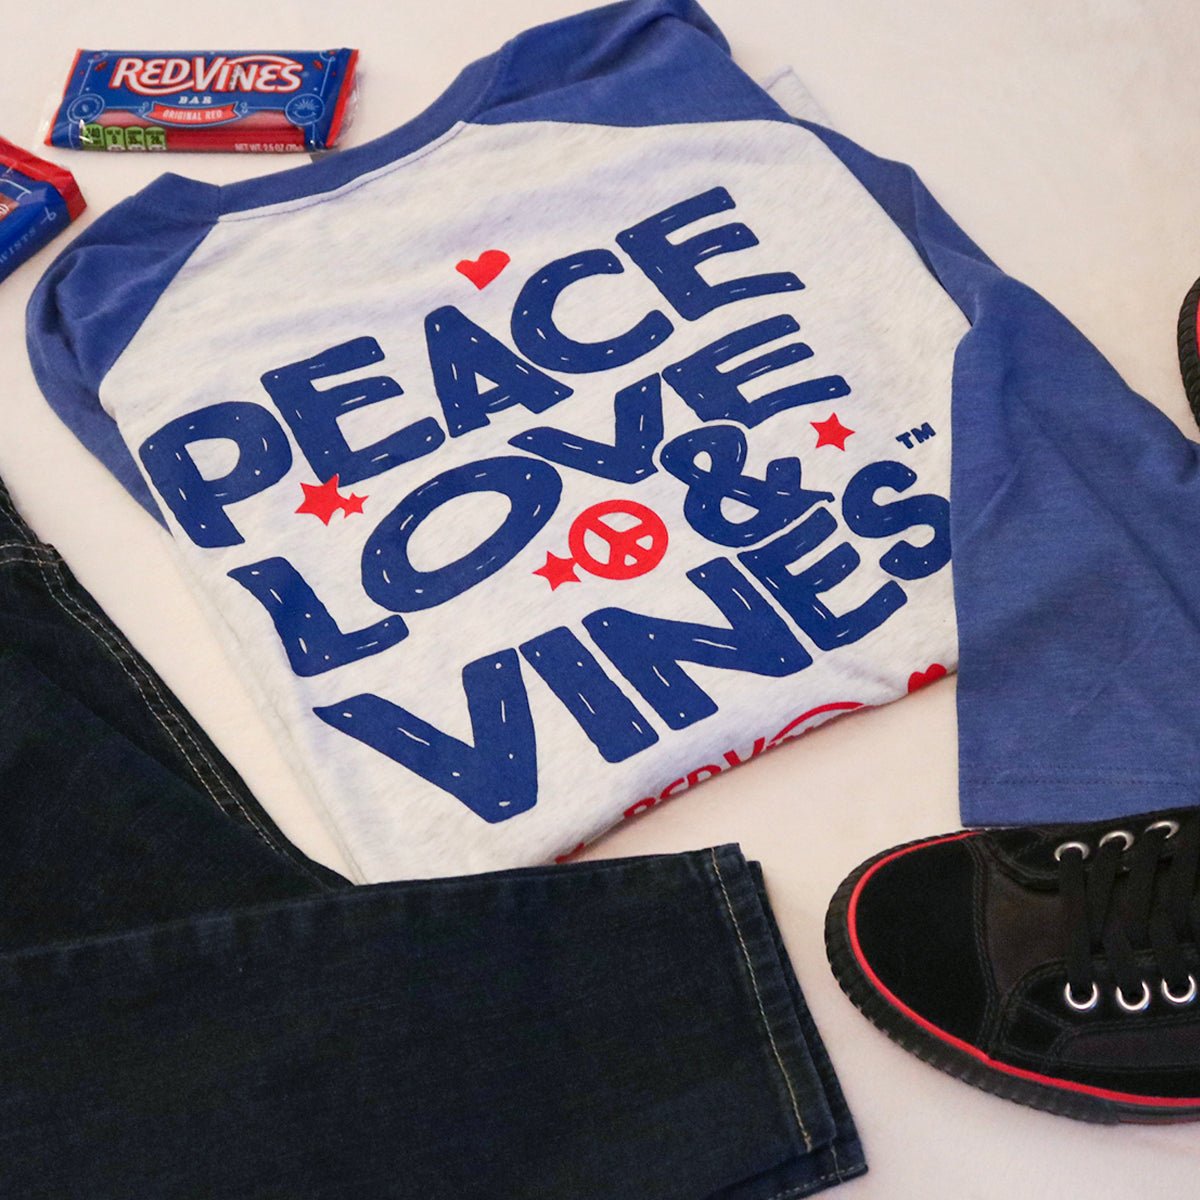 RED VINES Peace, Love & Vines T-Shirt with blue jeans, black sneakers, and some Red Vines Licorice